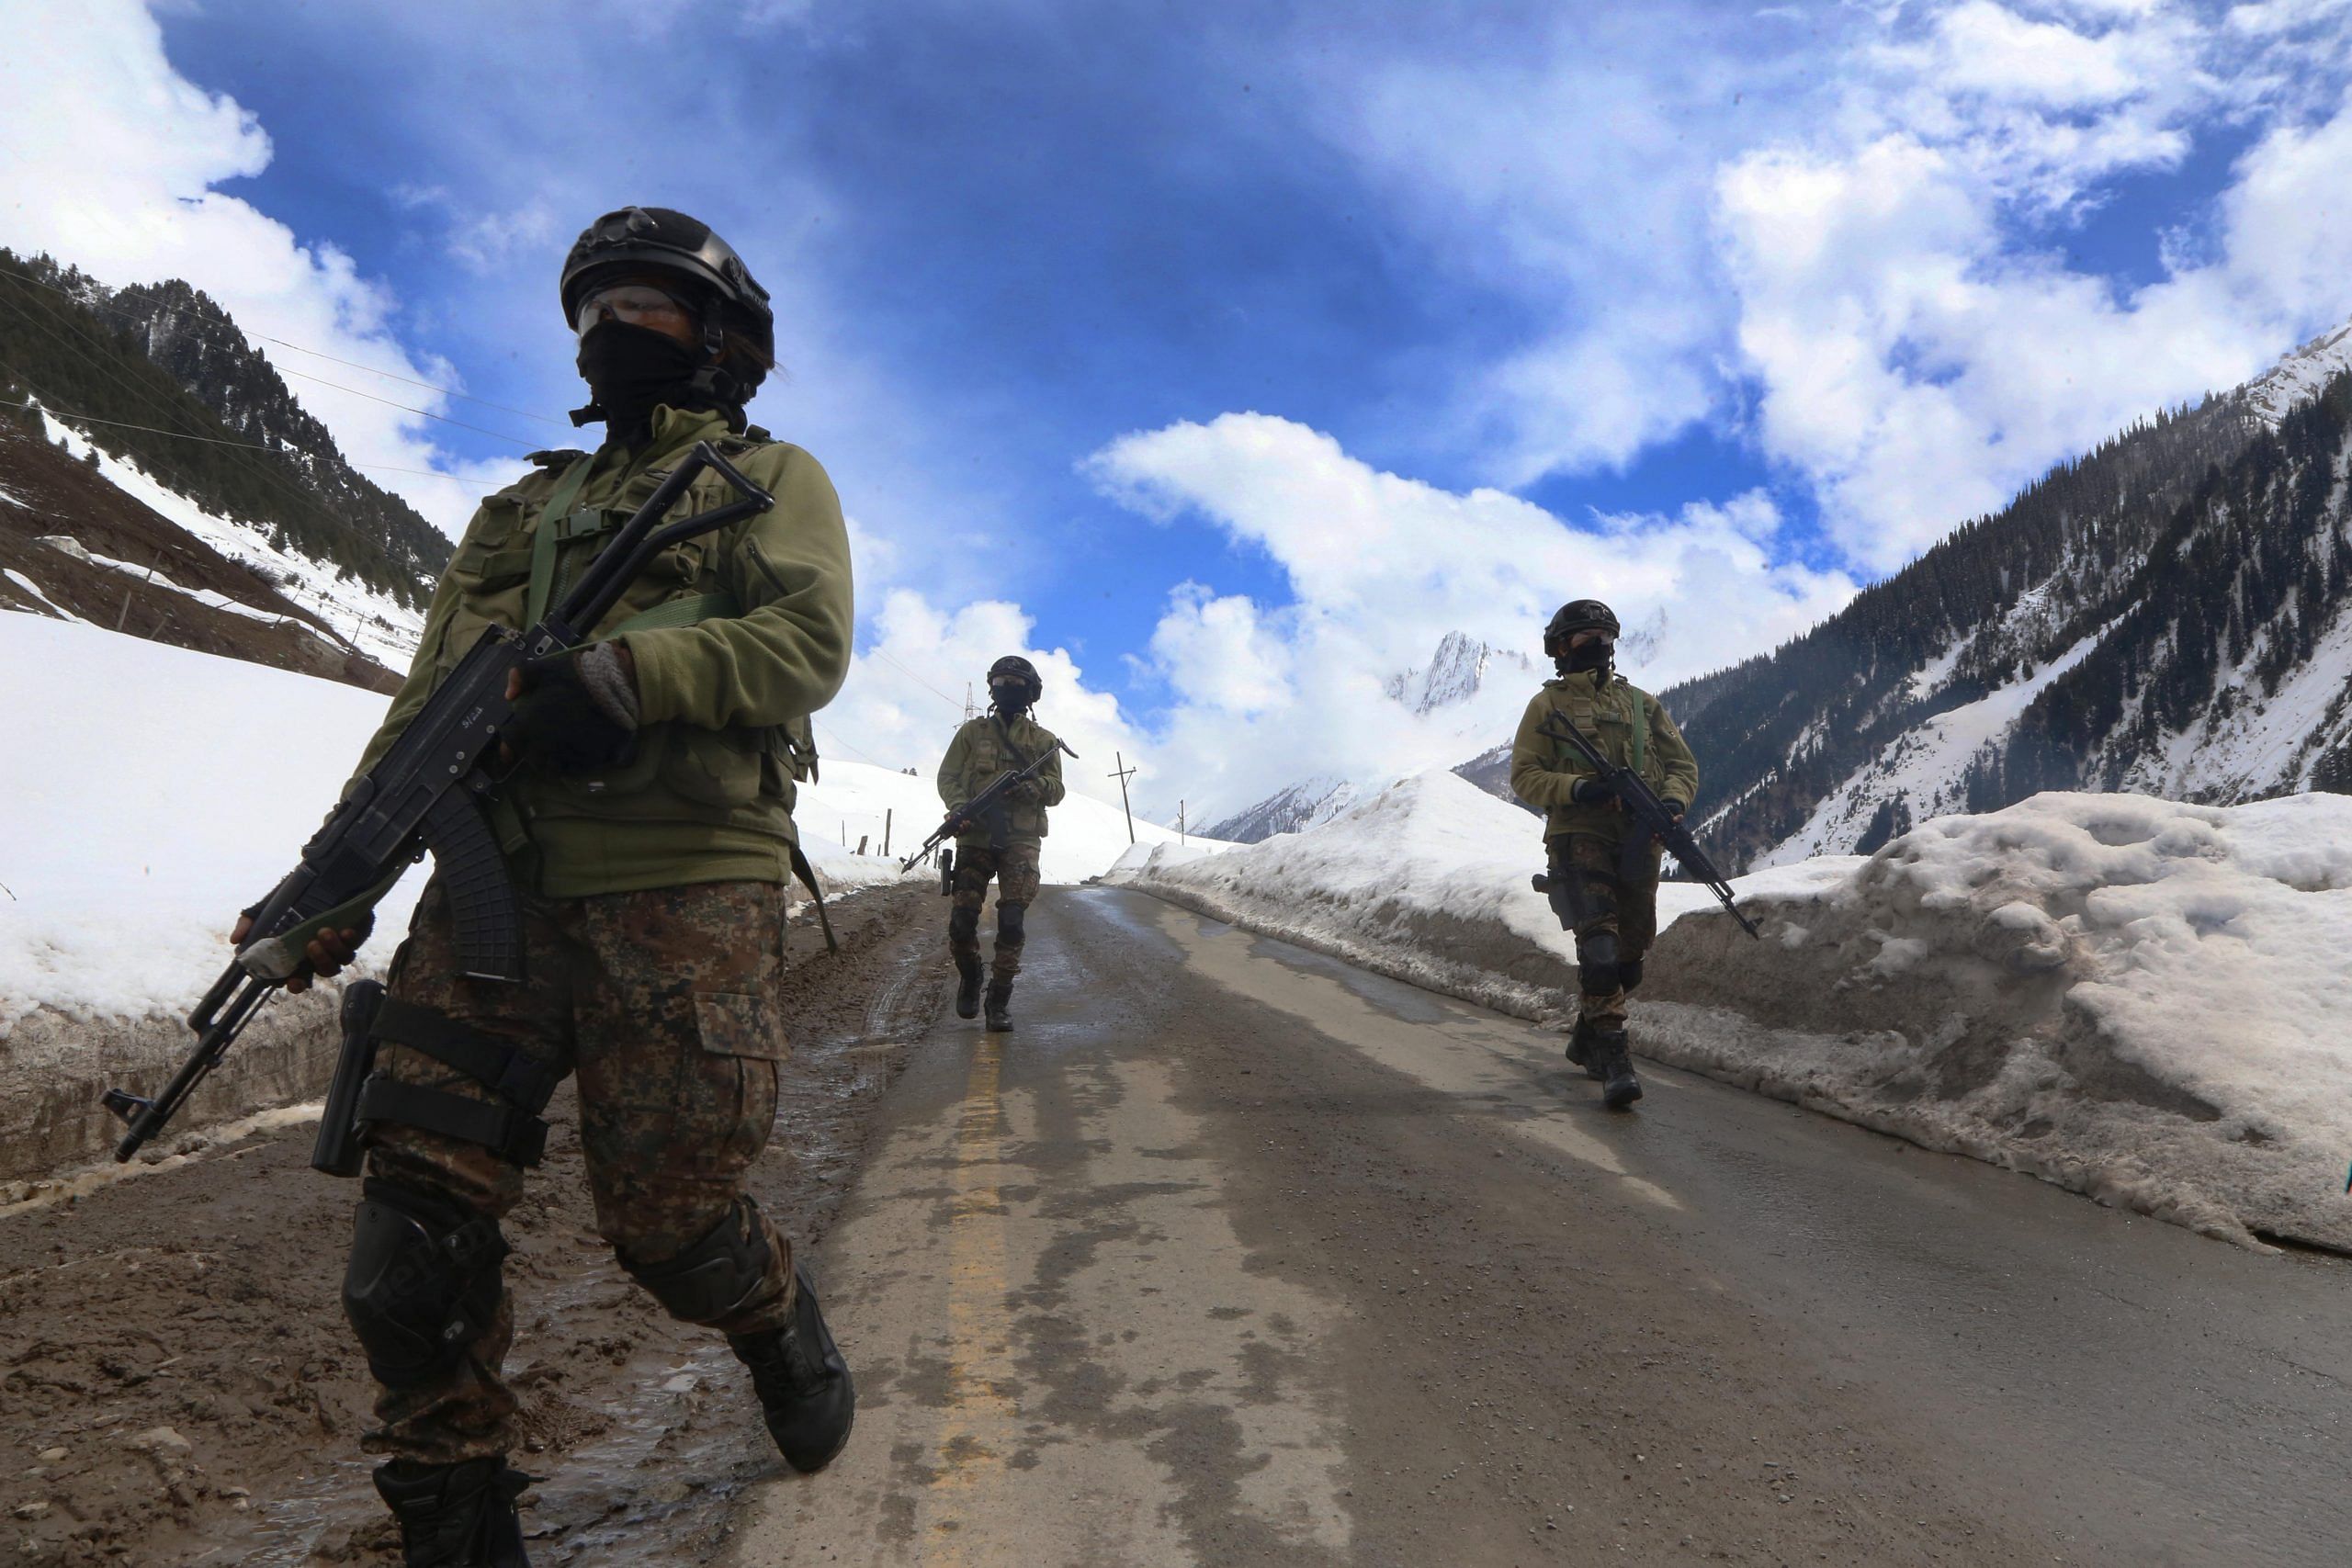 Life is often as rough for these women as the road and terrain they are traversing here. Members of the CRPF's Valley Quick Action Team demonstrate how they patrol the Amarnath road | Photo: Manisha Mondal | ThePrint